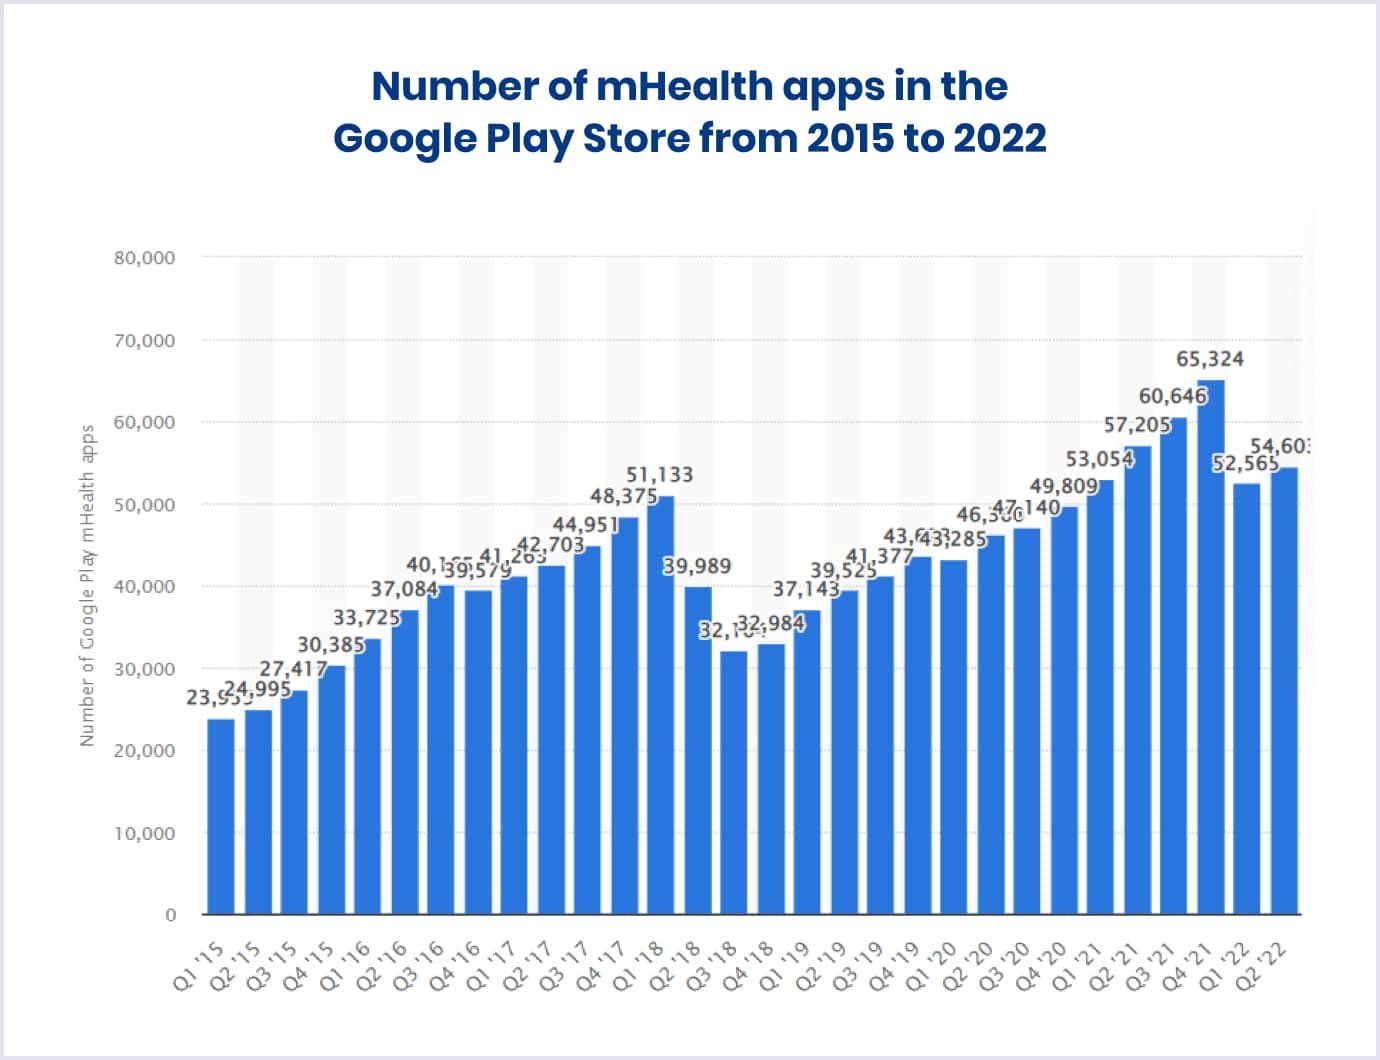 Number of mHealth apps available in the Google Play Store from 2015 to 2022